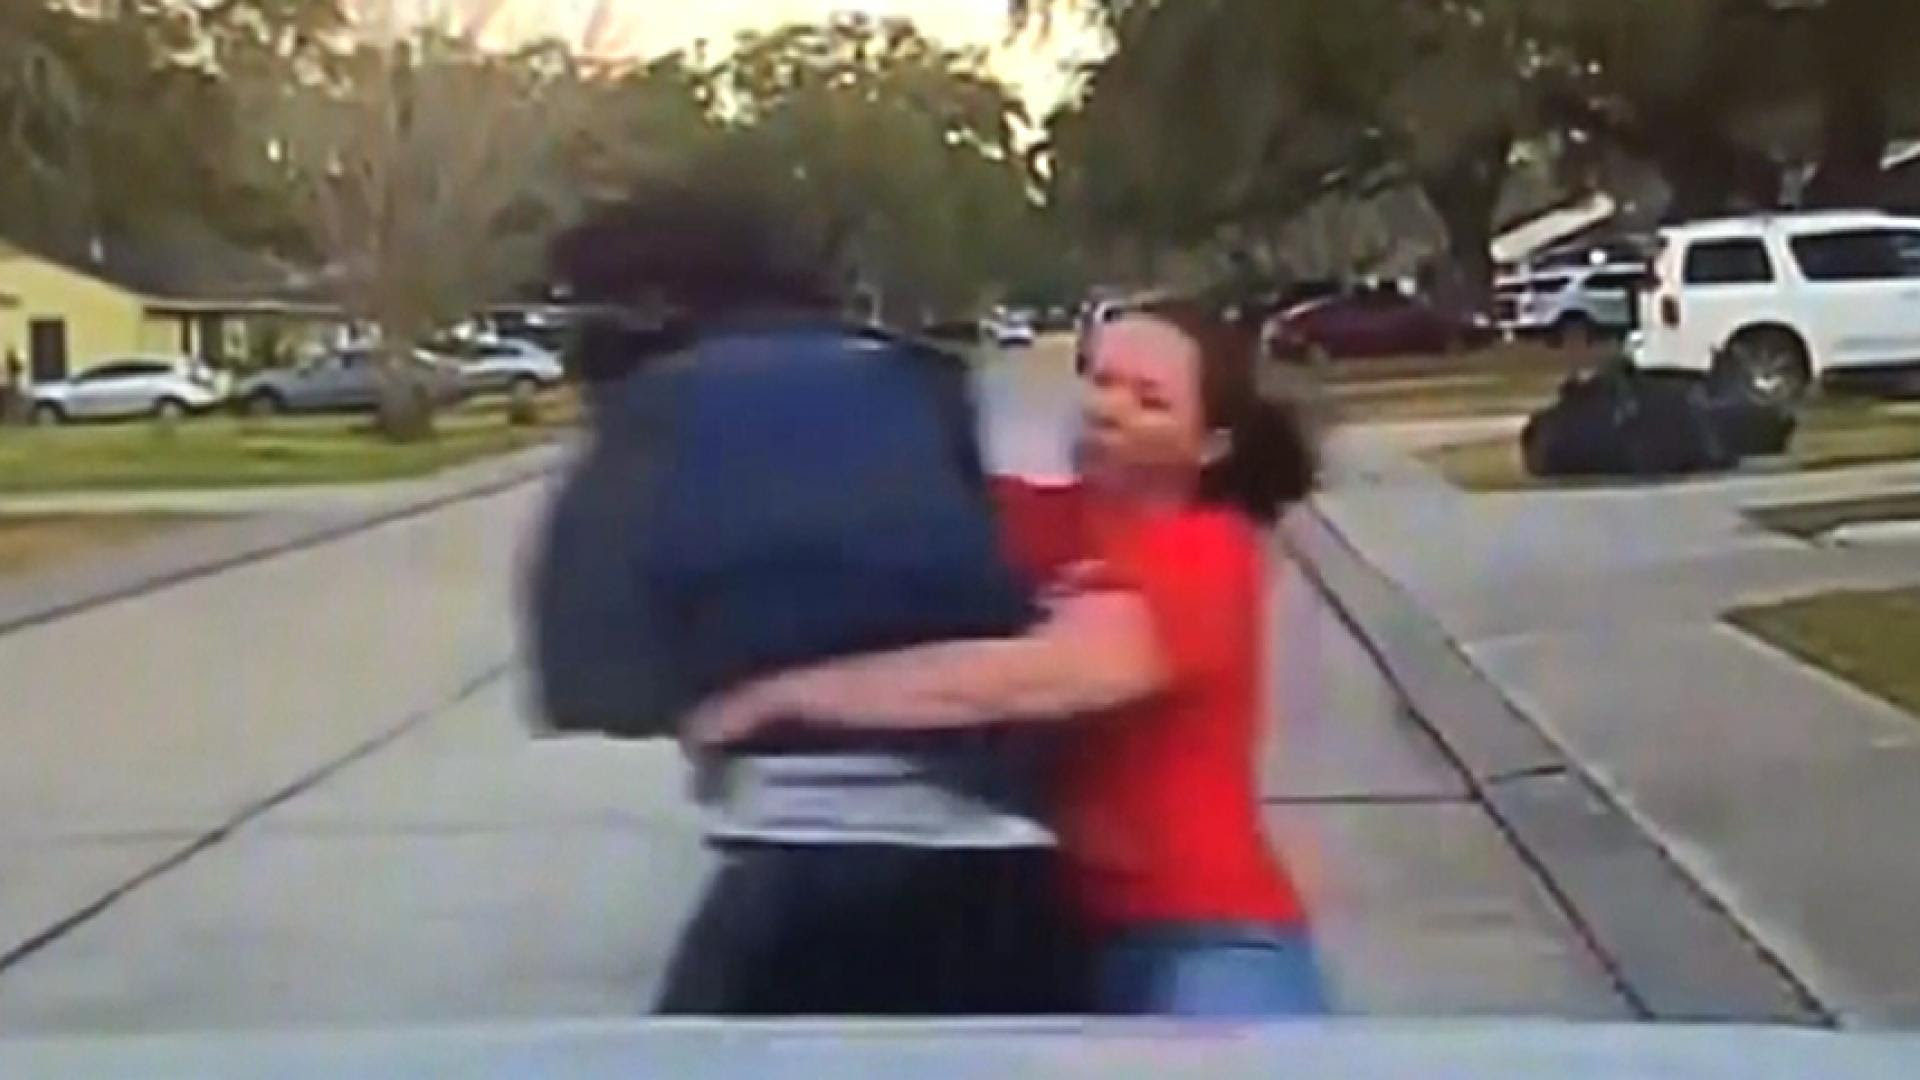 This mother tackled the man accused of peeping in her daughter's window